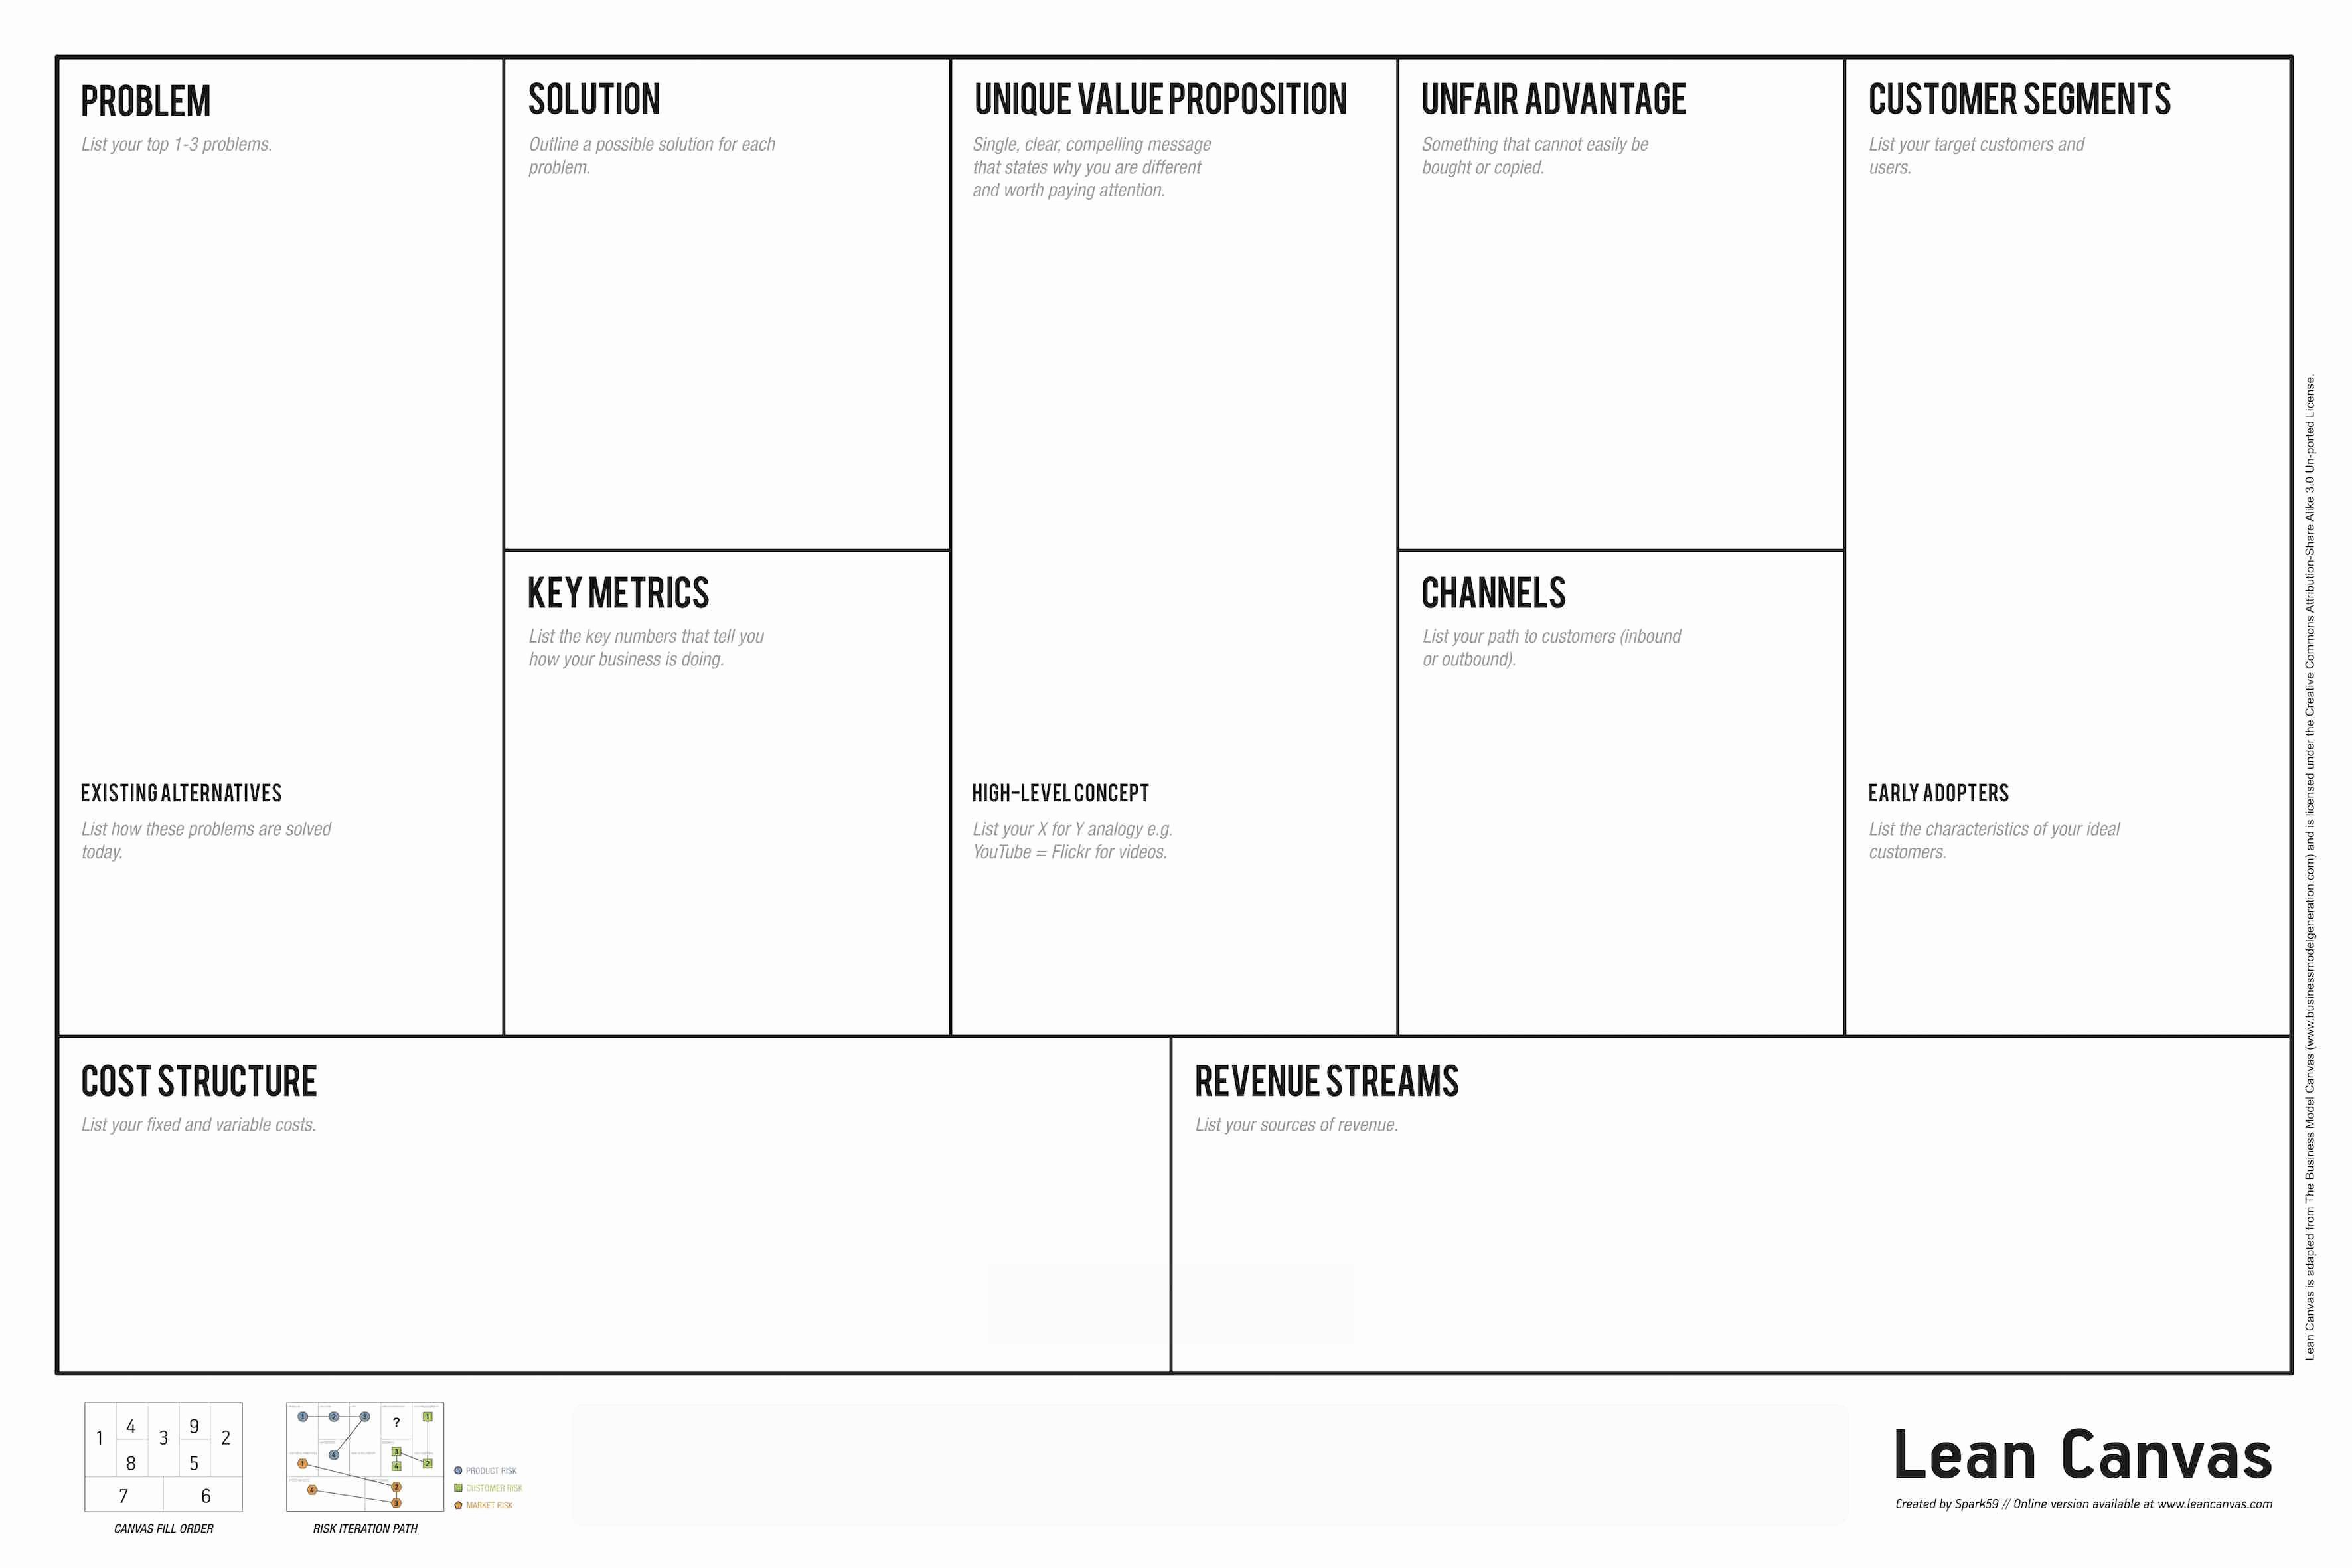 Lean Canvas Business Model toolbox